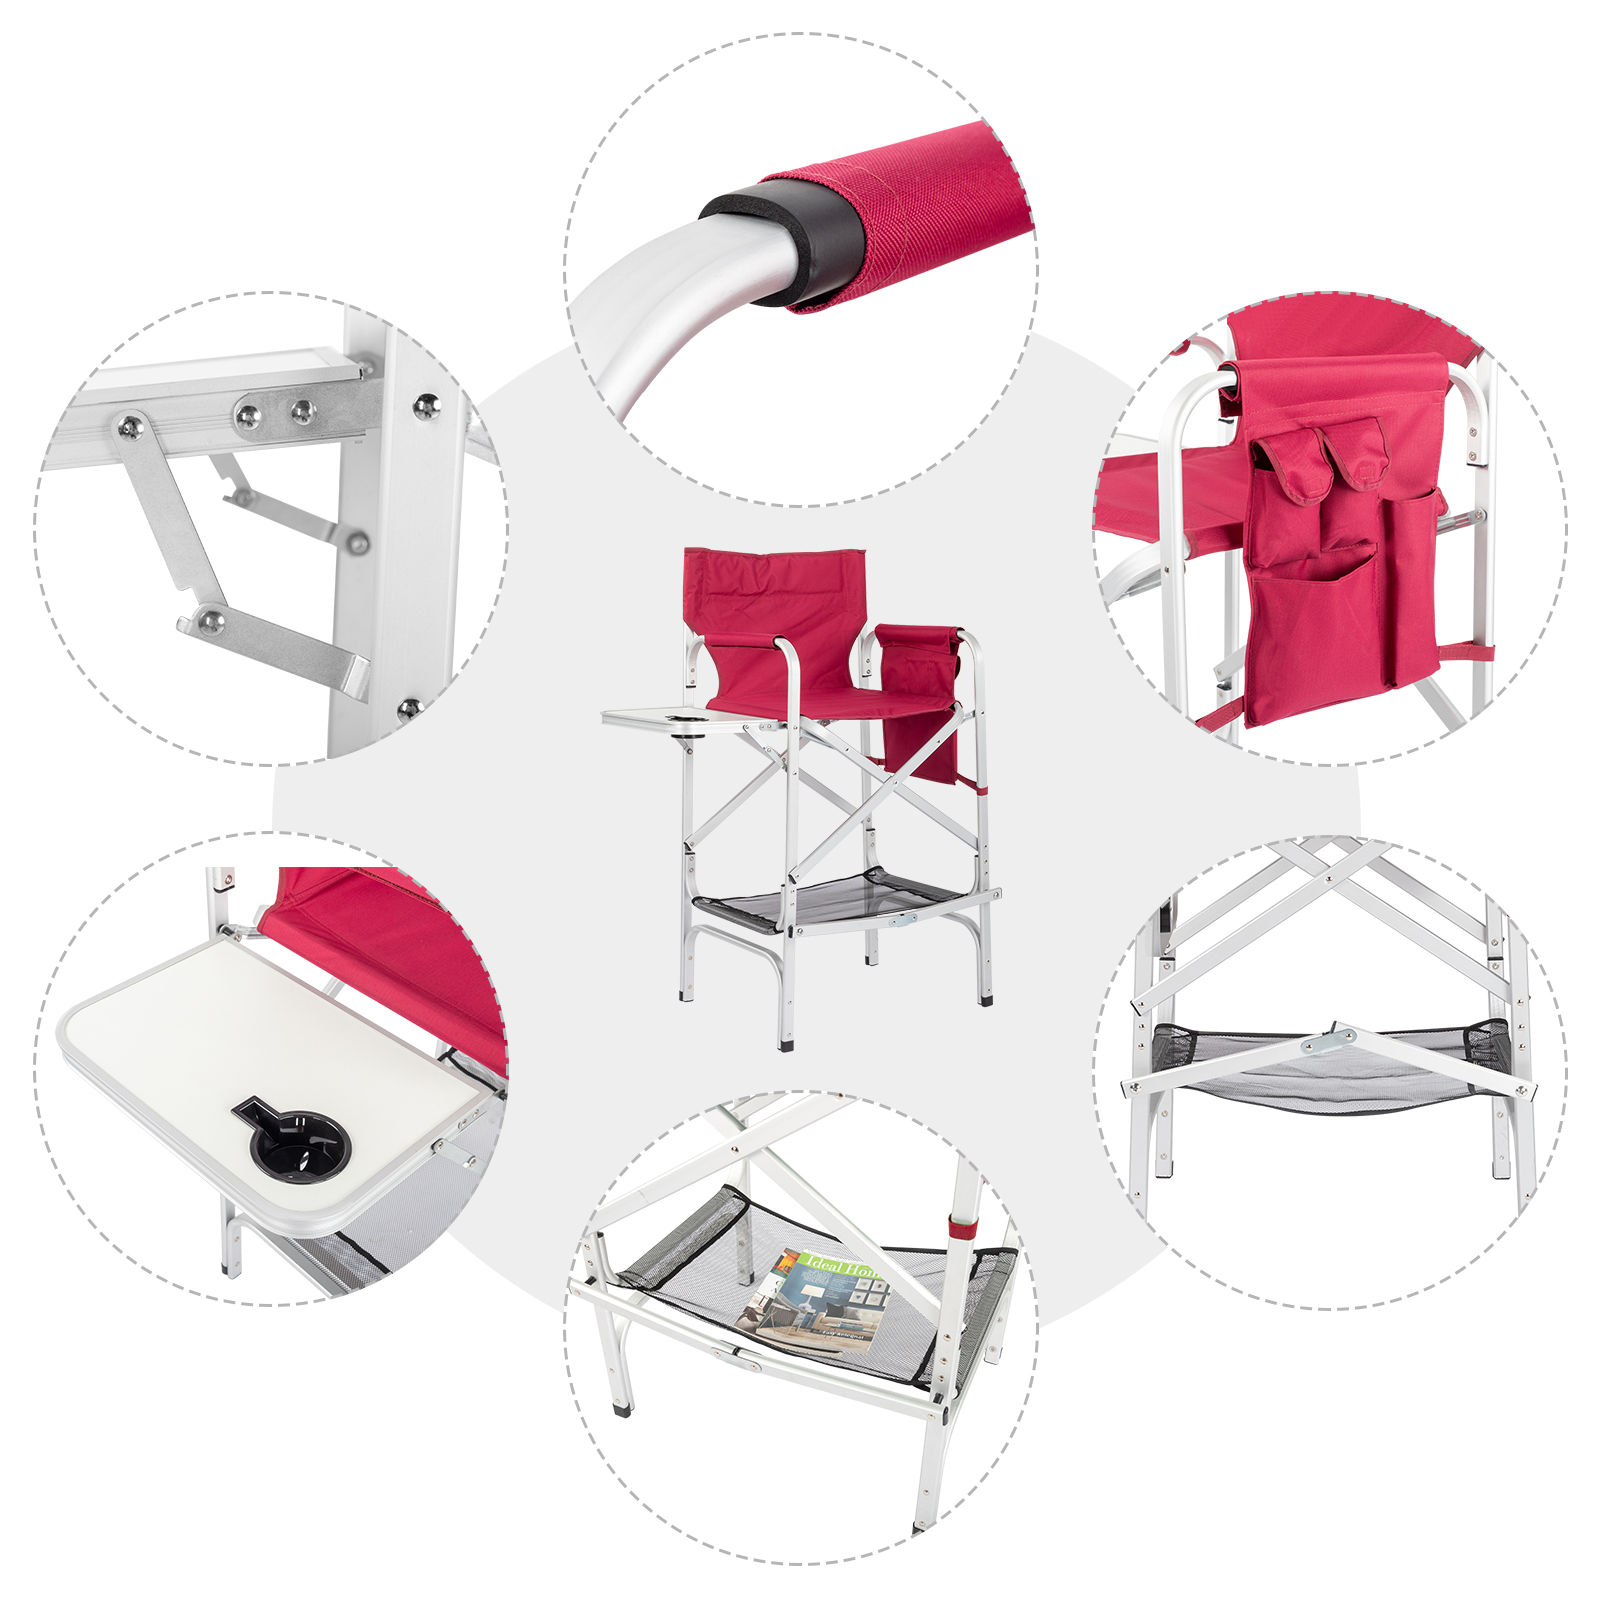 GoDecor Director Chair Oversize Padded Seat Camping Chair with Side Table Red - image 3 of 7